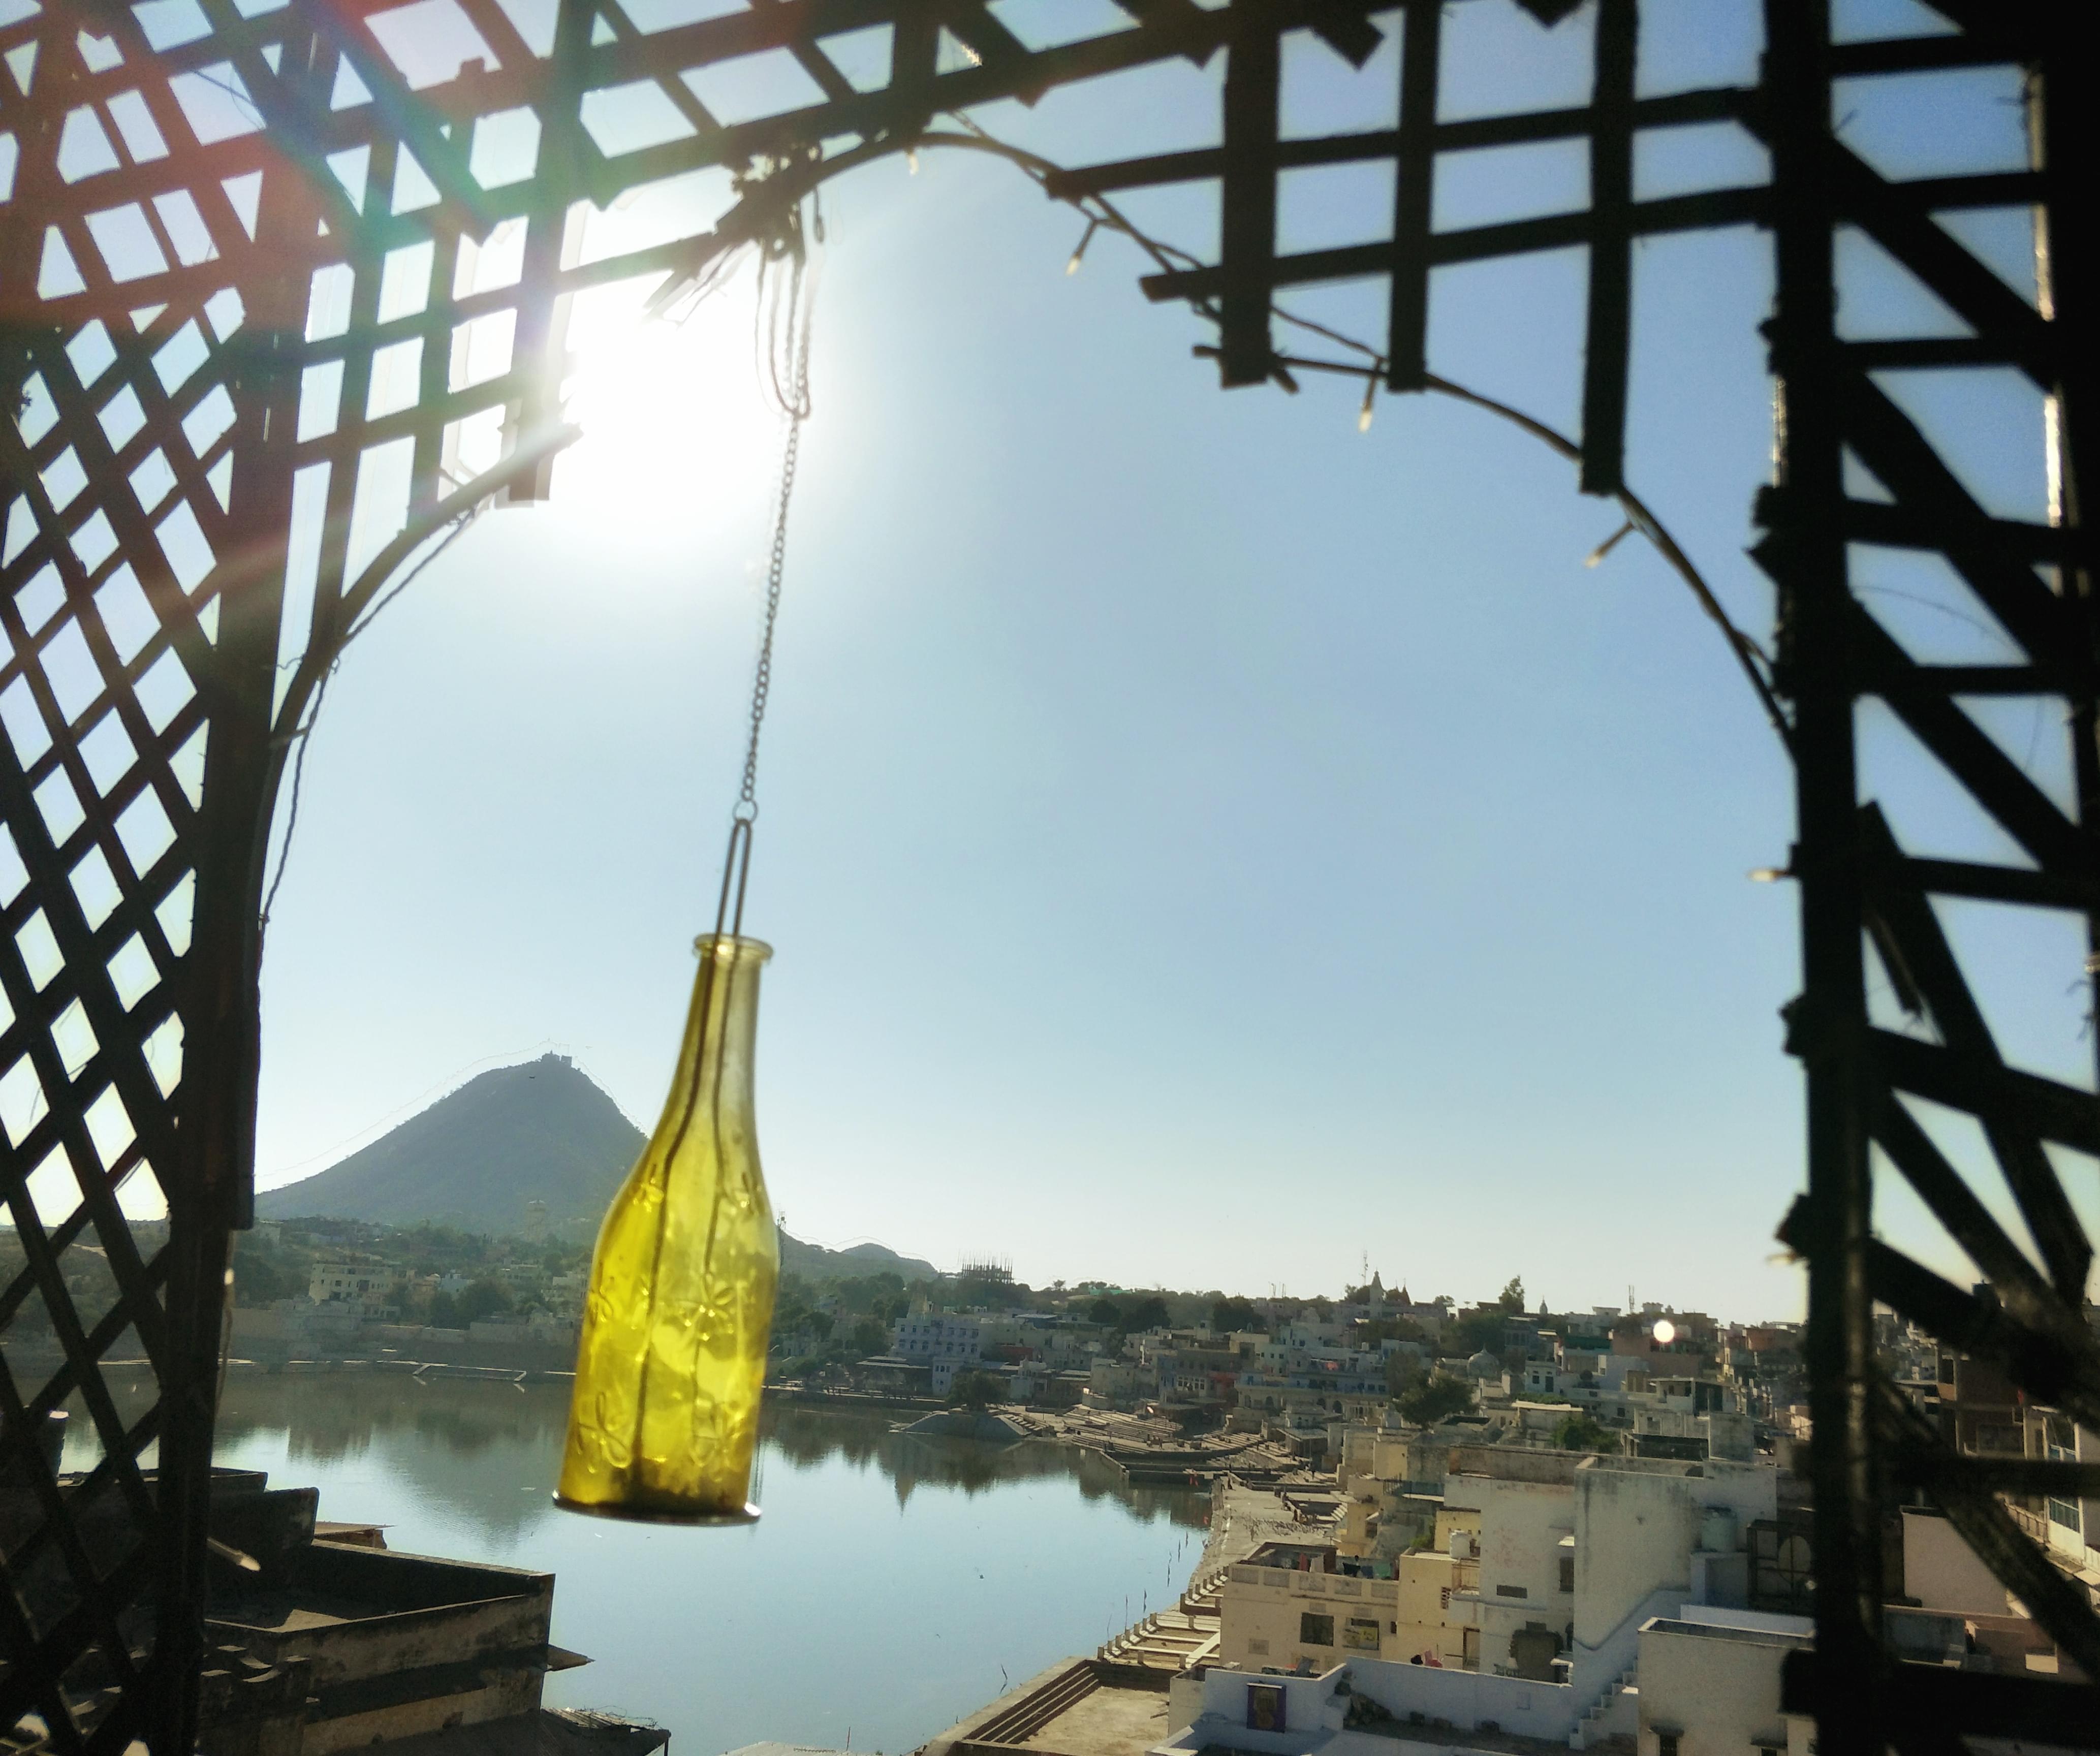 View of Pushkar lake from one of the cafes